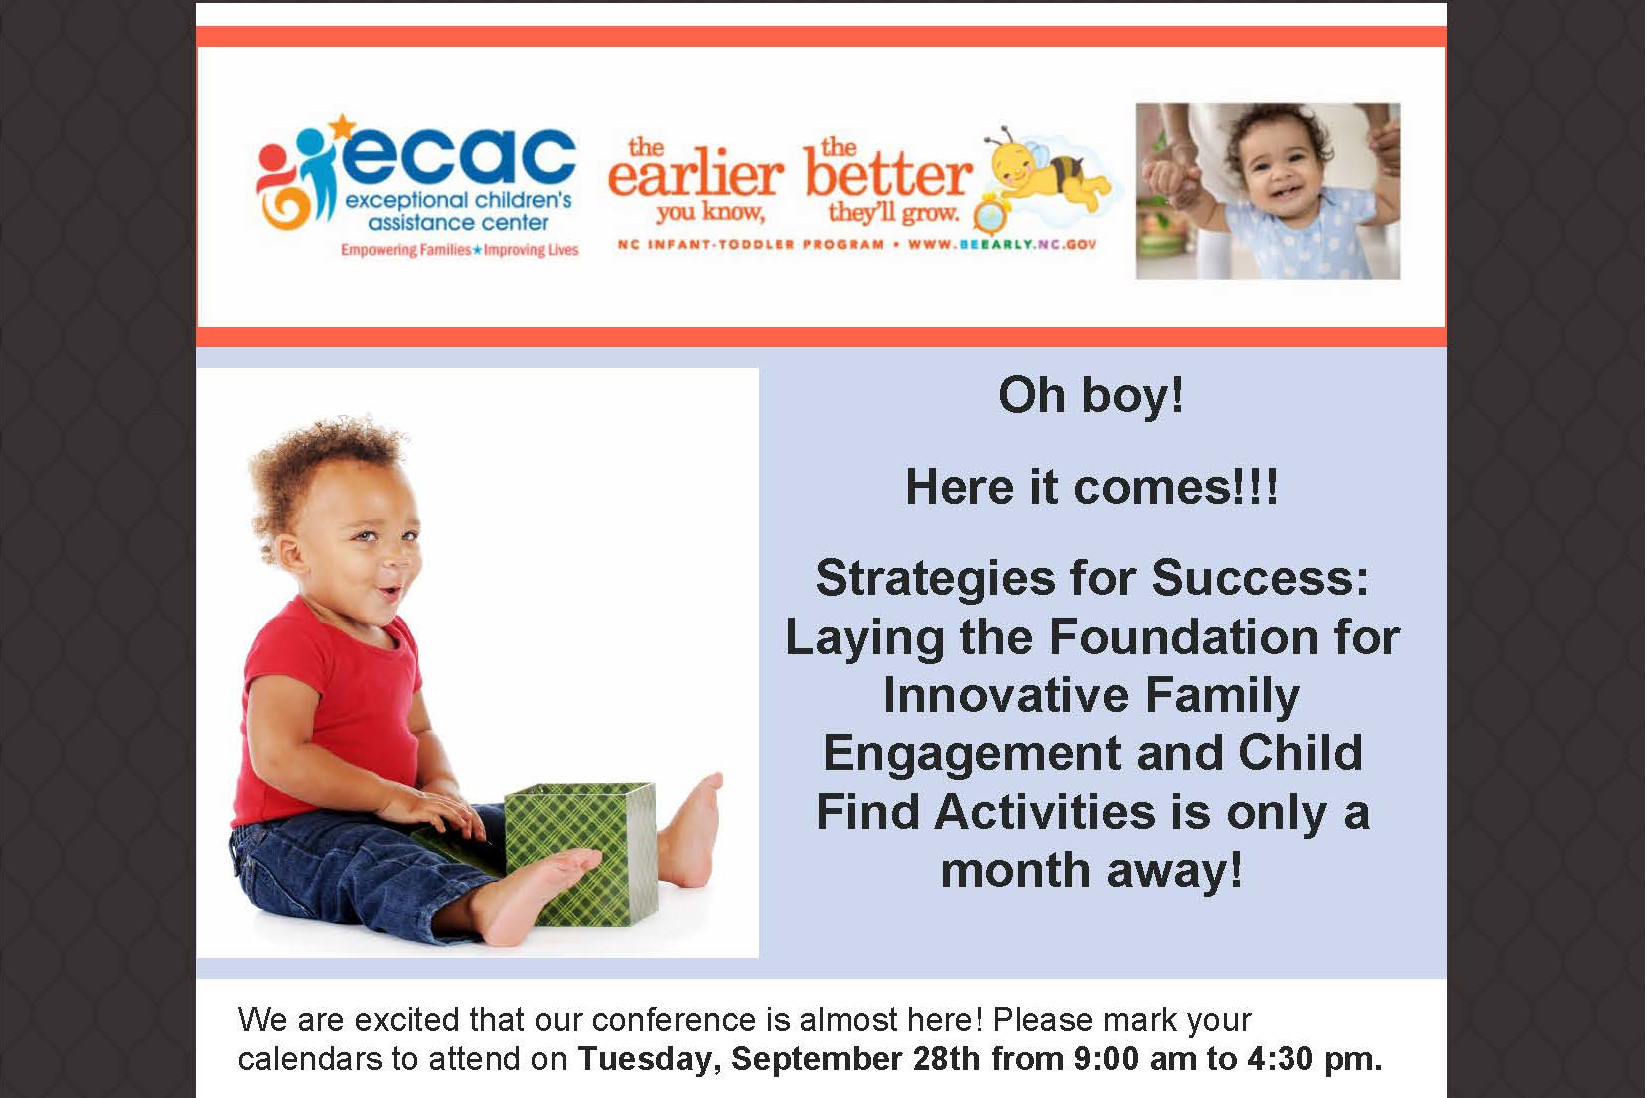 image of a toddler playing with a box with text that reads "Oh boy! Here it comes! Strategies for success: laying the foundation for innovative family engagement and child find activities is only a month away